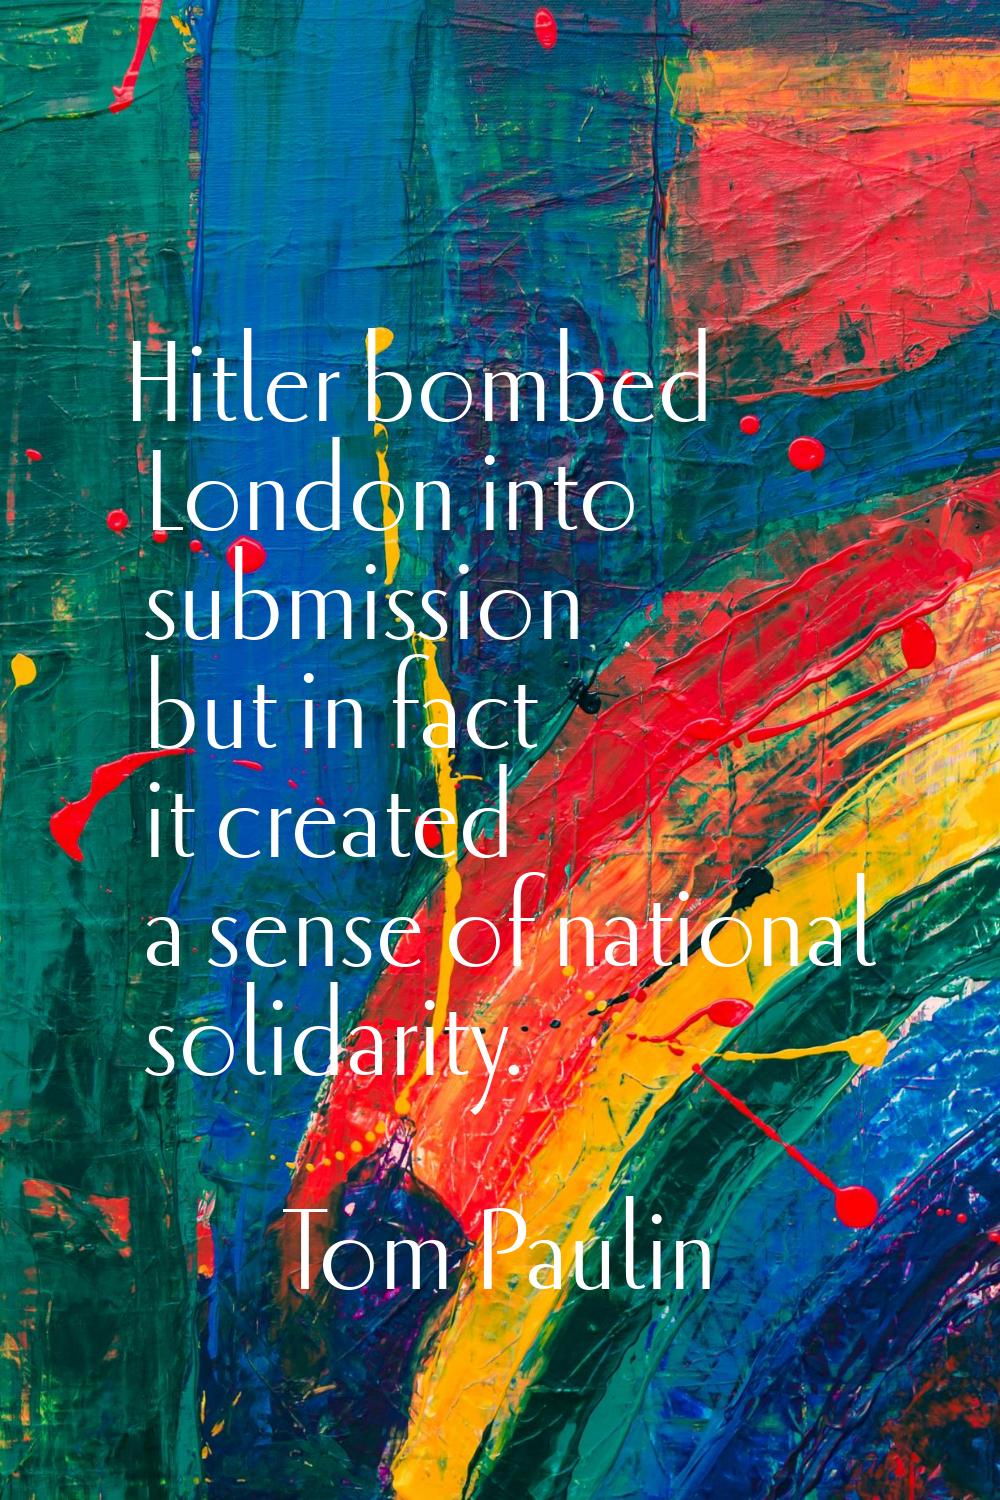 Hitler bombed London into submission but in fact it created a sense of national solidarity.